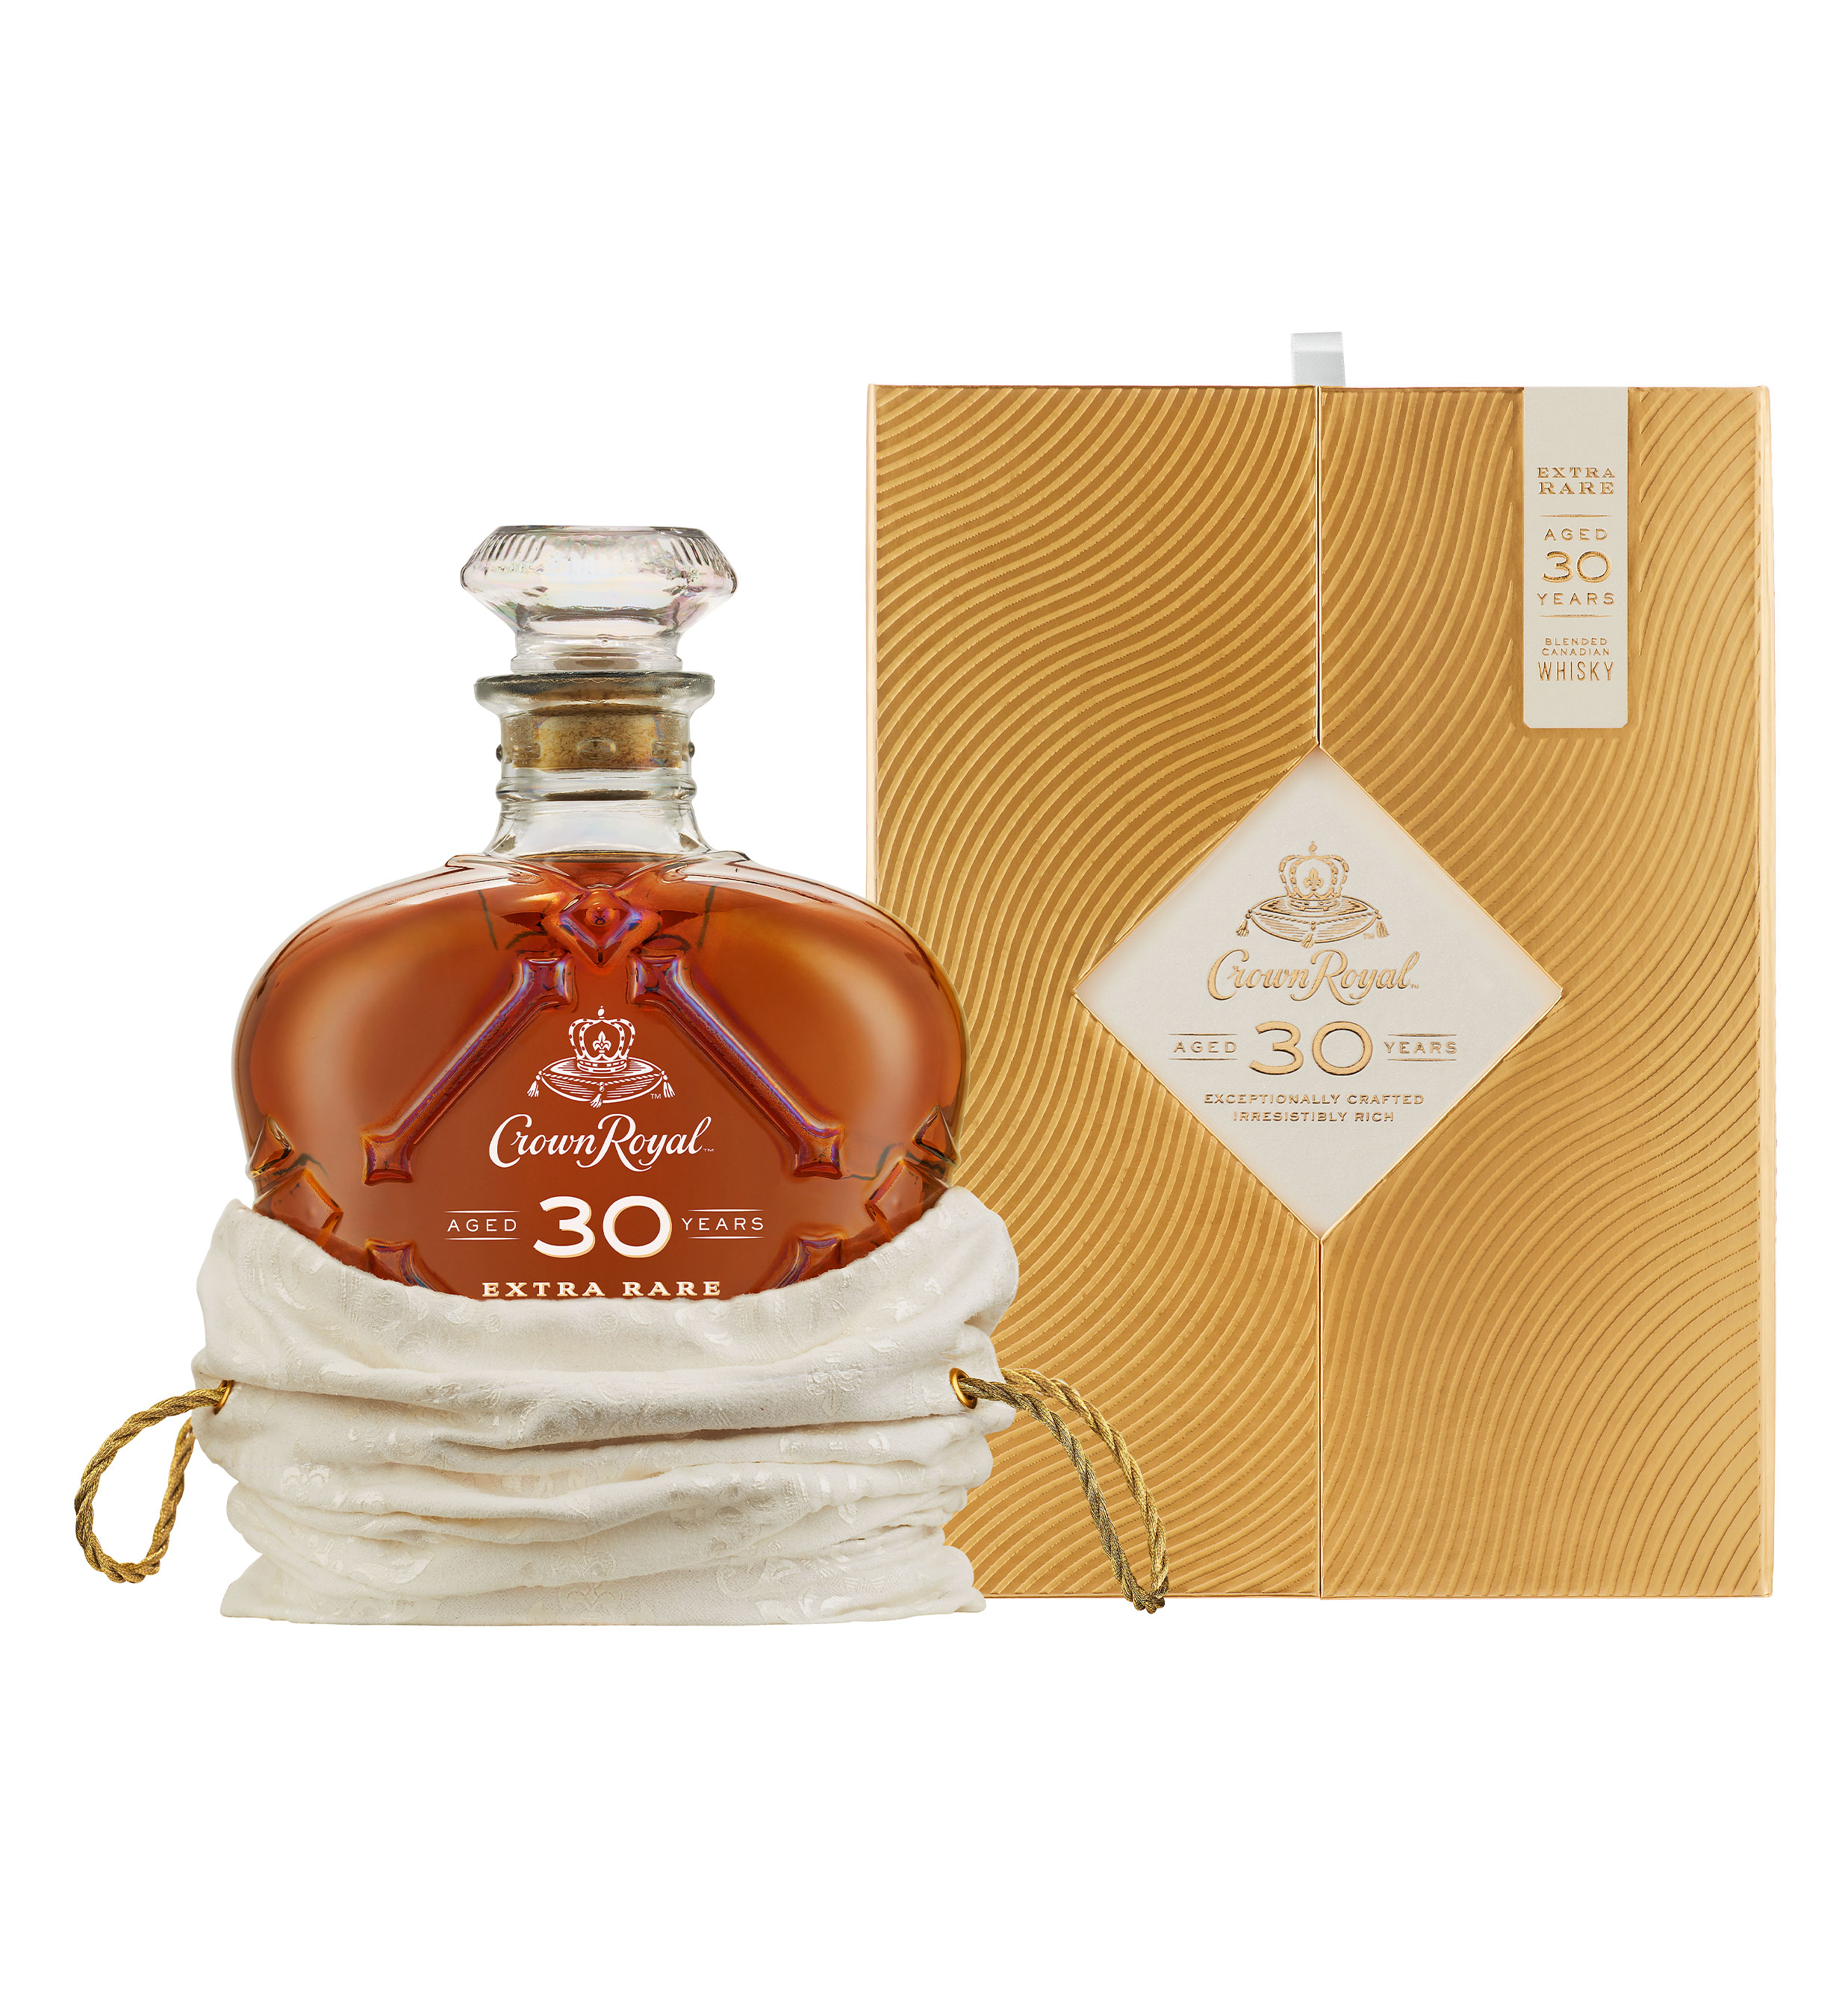 Crown Royal Aged 30 Years in its luxurious cream-colored, iconic Crown Royal bag with golden collector’s box.